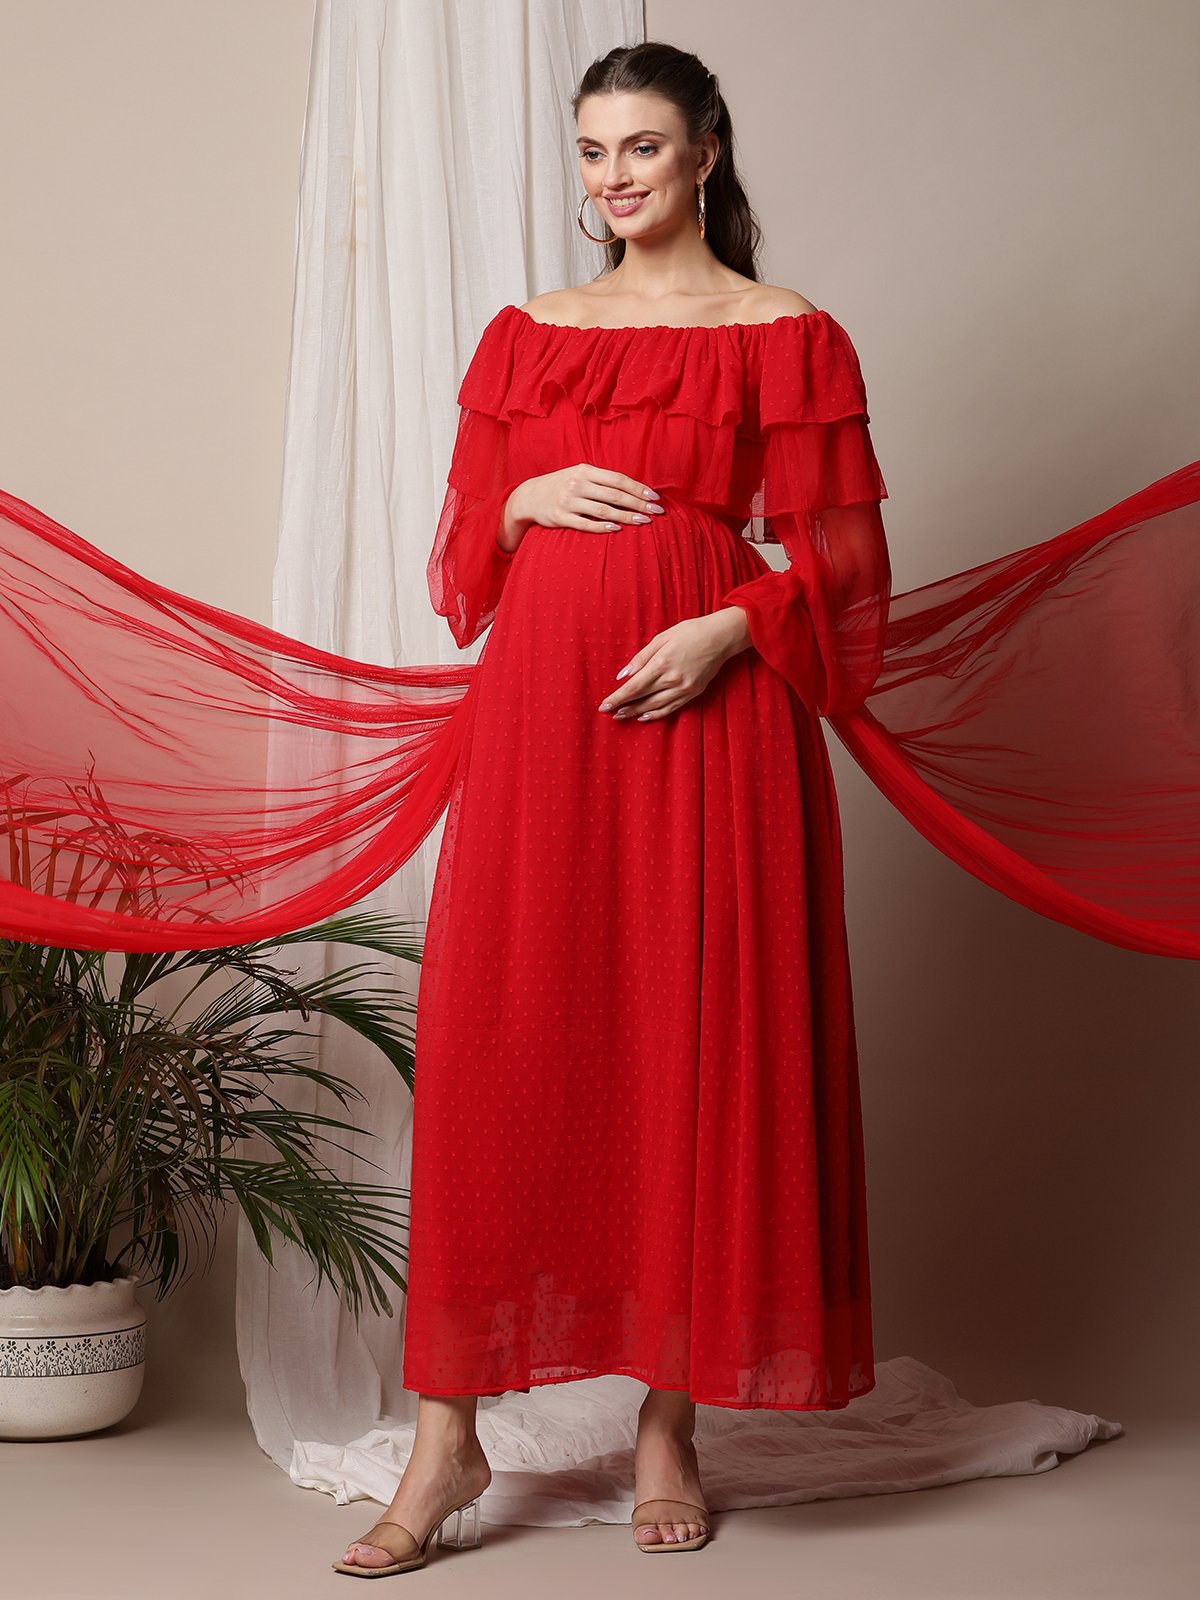 Baby Shower Dresses, Dark Red Maternity Dress, Red Maternity Gown